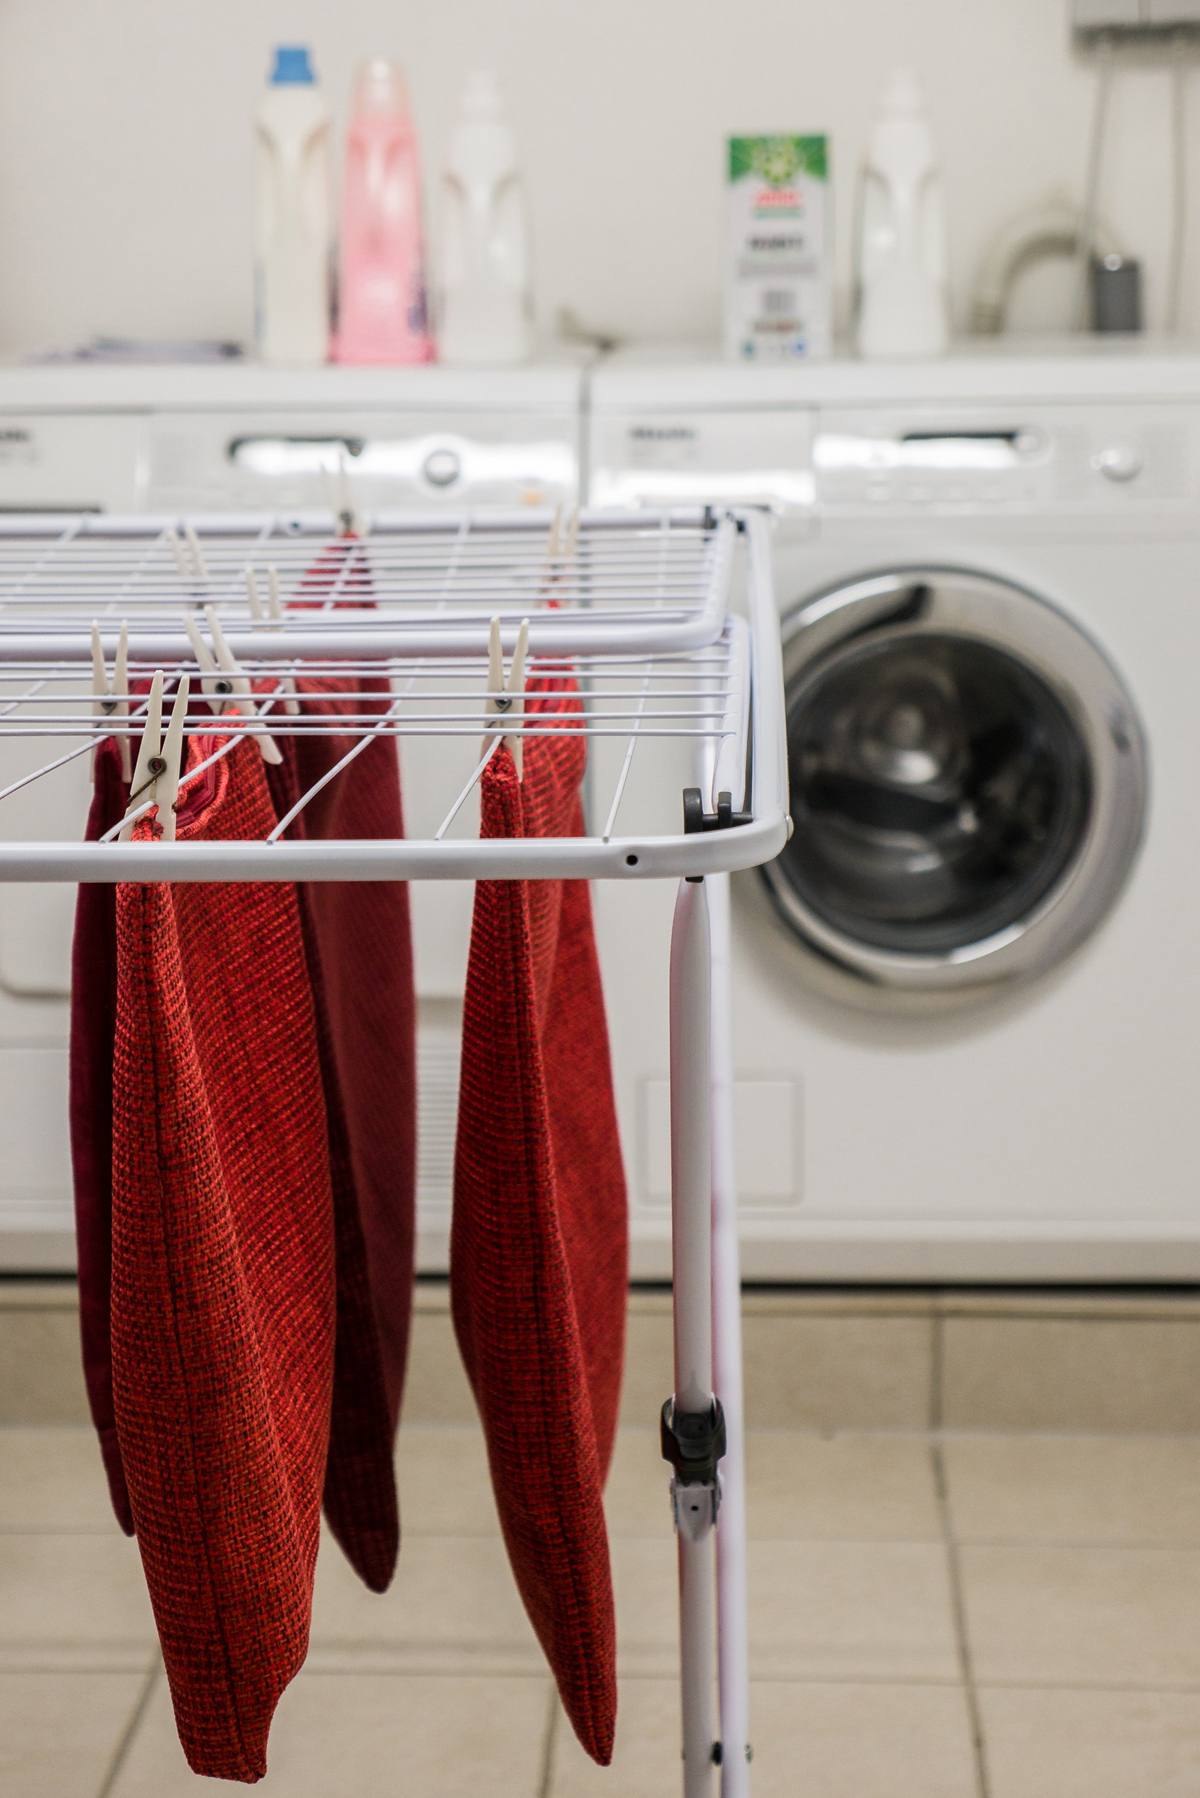 Air Drying Clothes without a Clothesline